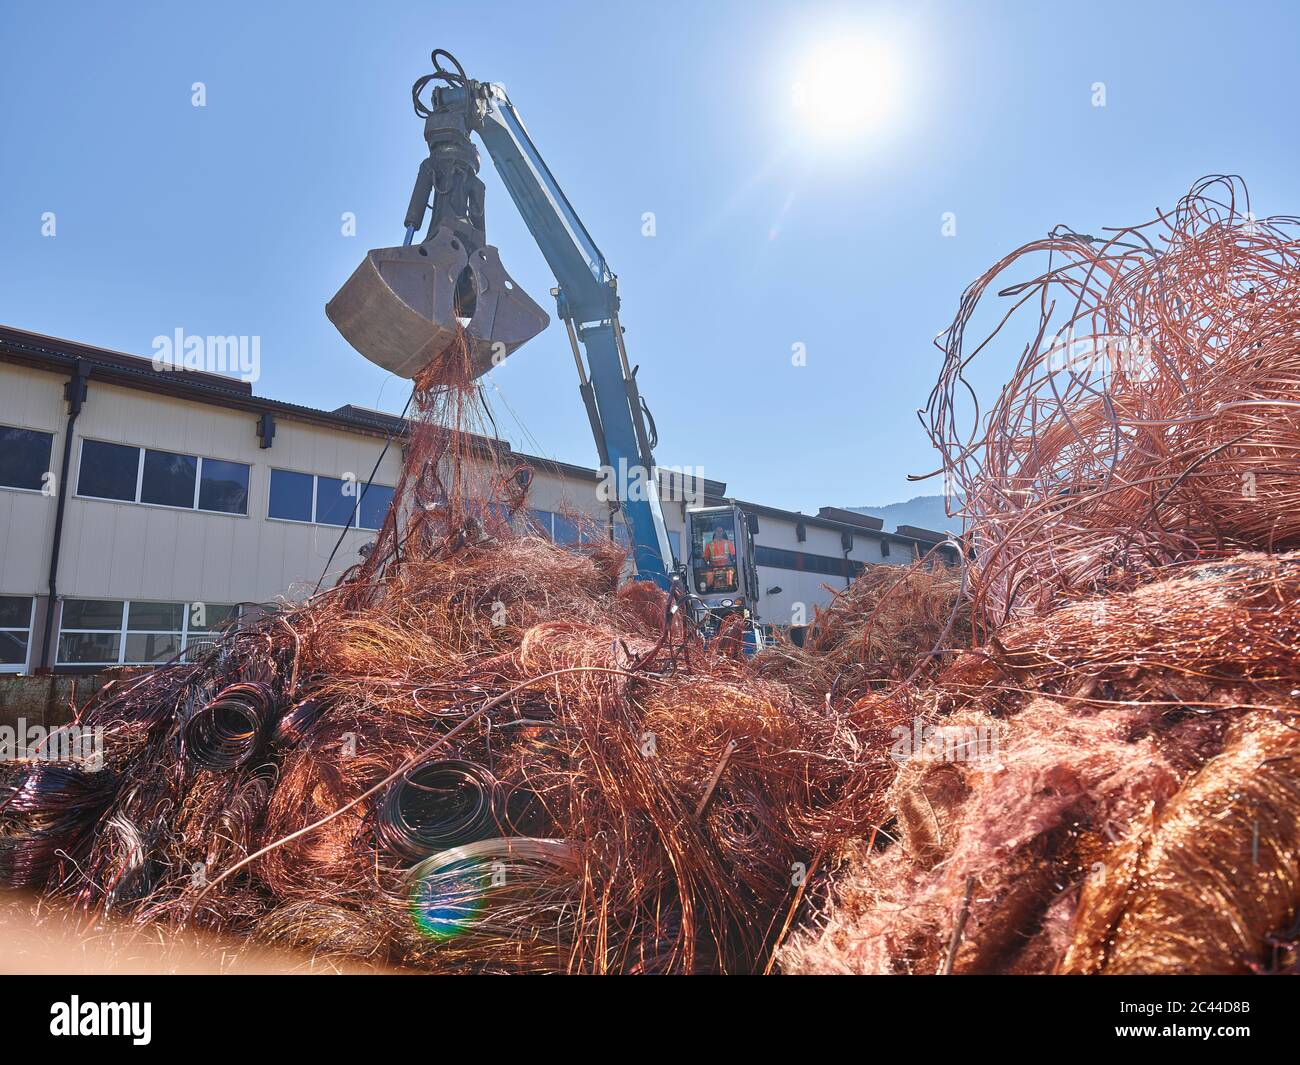 Austria, Tyrol, Brixlegg, Electronic copper wires being recycled in junkyard Stock Photo